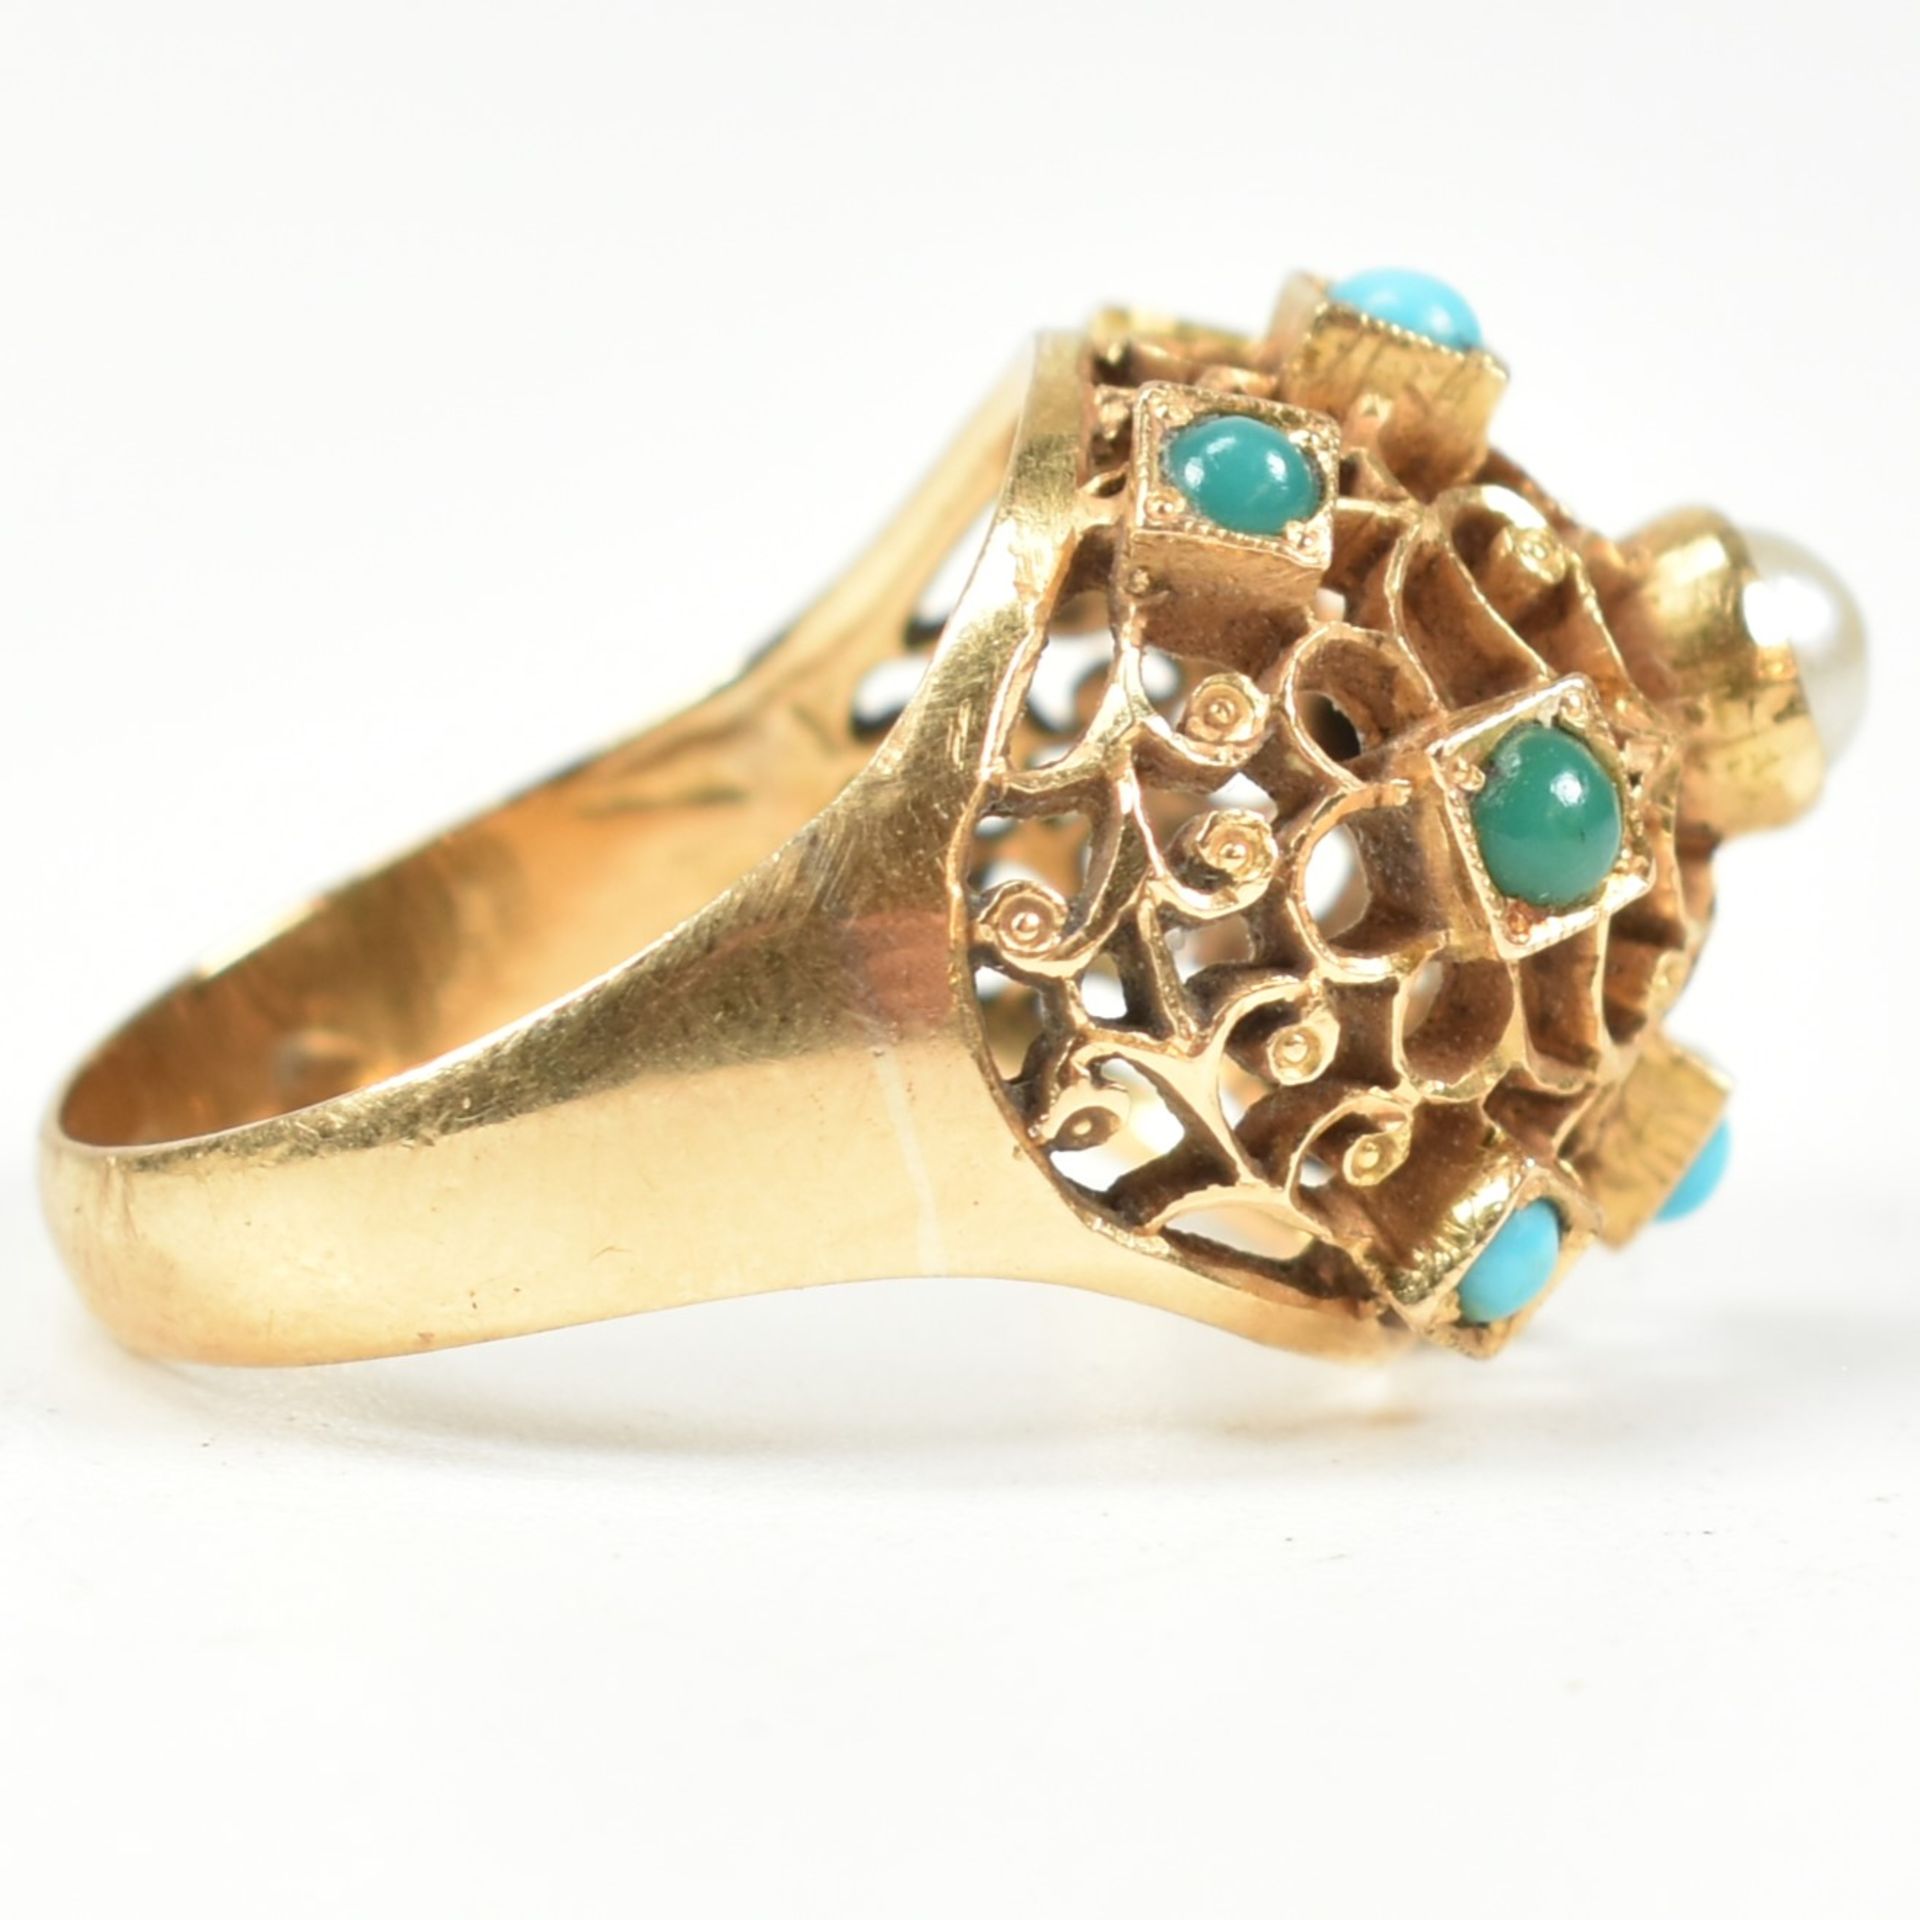 18CT GOLD & TURQUOISE BOMBE RING - Image 4 of 10